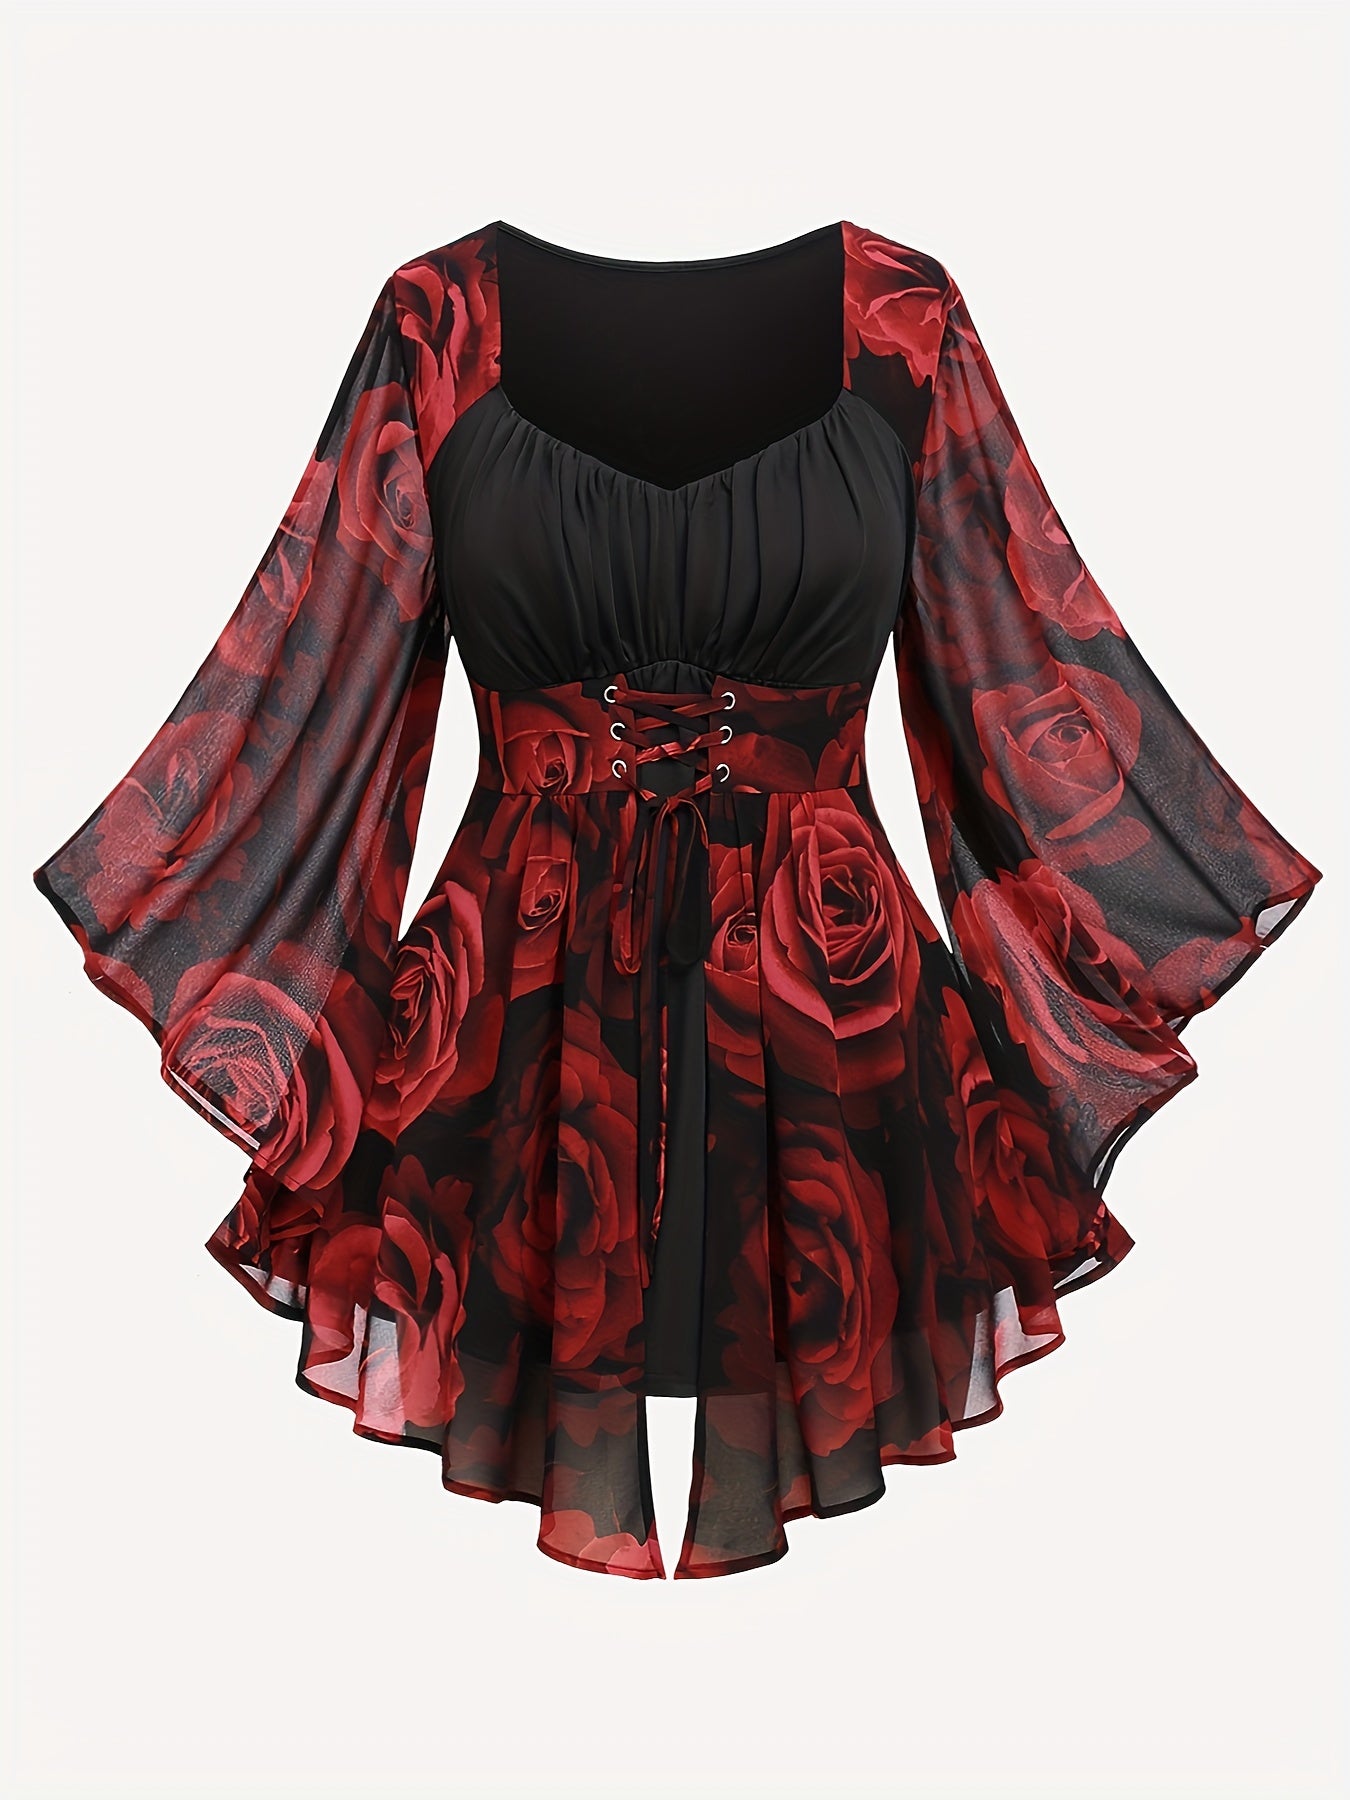 An elegant Plus Size Rose Print T-Shirt, Valentine's Day V Neck Long Sleeve T-Shirt, Women's Plus Size Clothing with a black base adorned with red rose patterns, featuring a V-neck, bell sleeves, and a lace-up waist detail by Maramalive™.